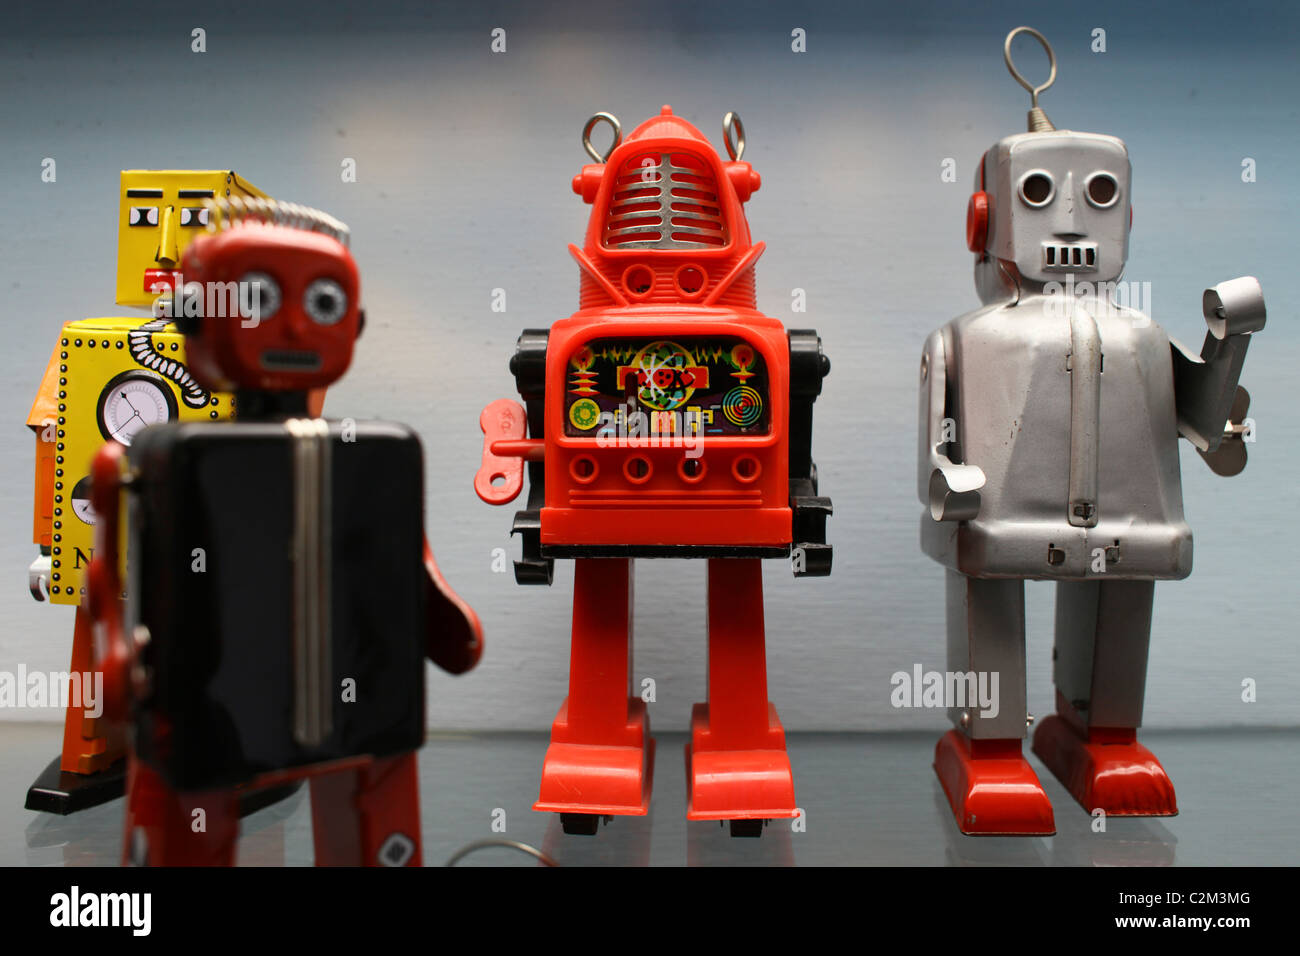 Robot toys displayed at the toy museum in Prague Czech Republic Stock Photo